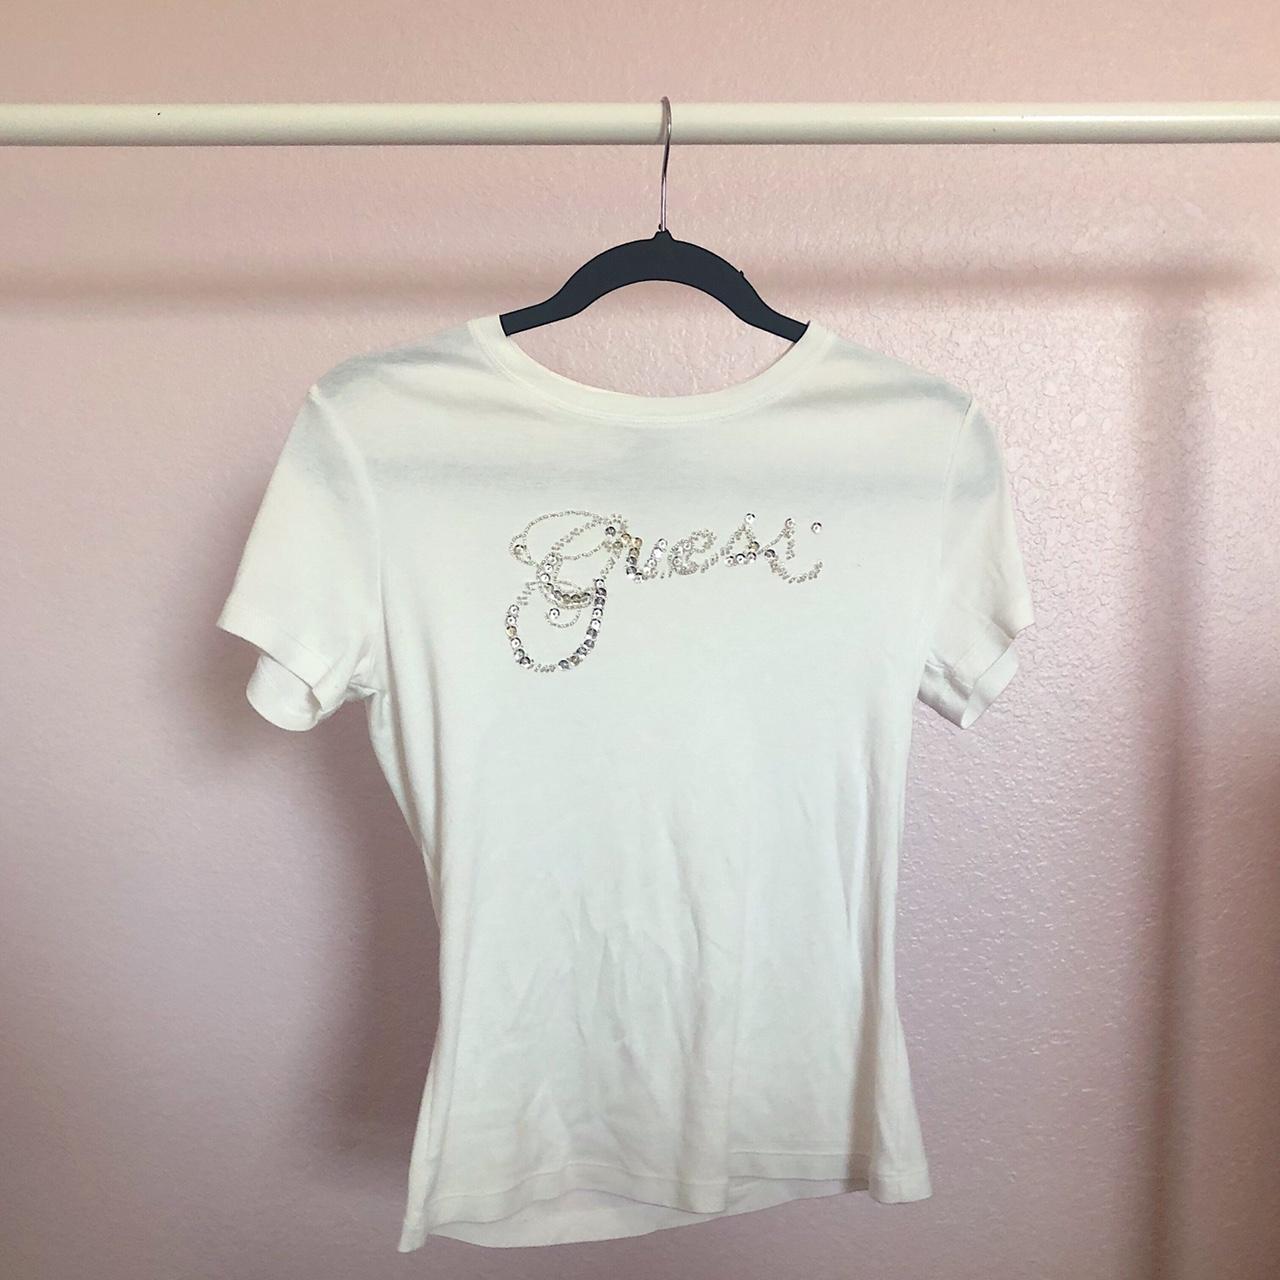 Guess Women's White and Silver T-shirt (2)